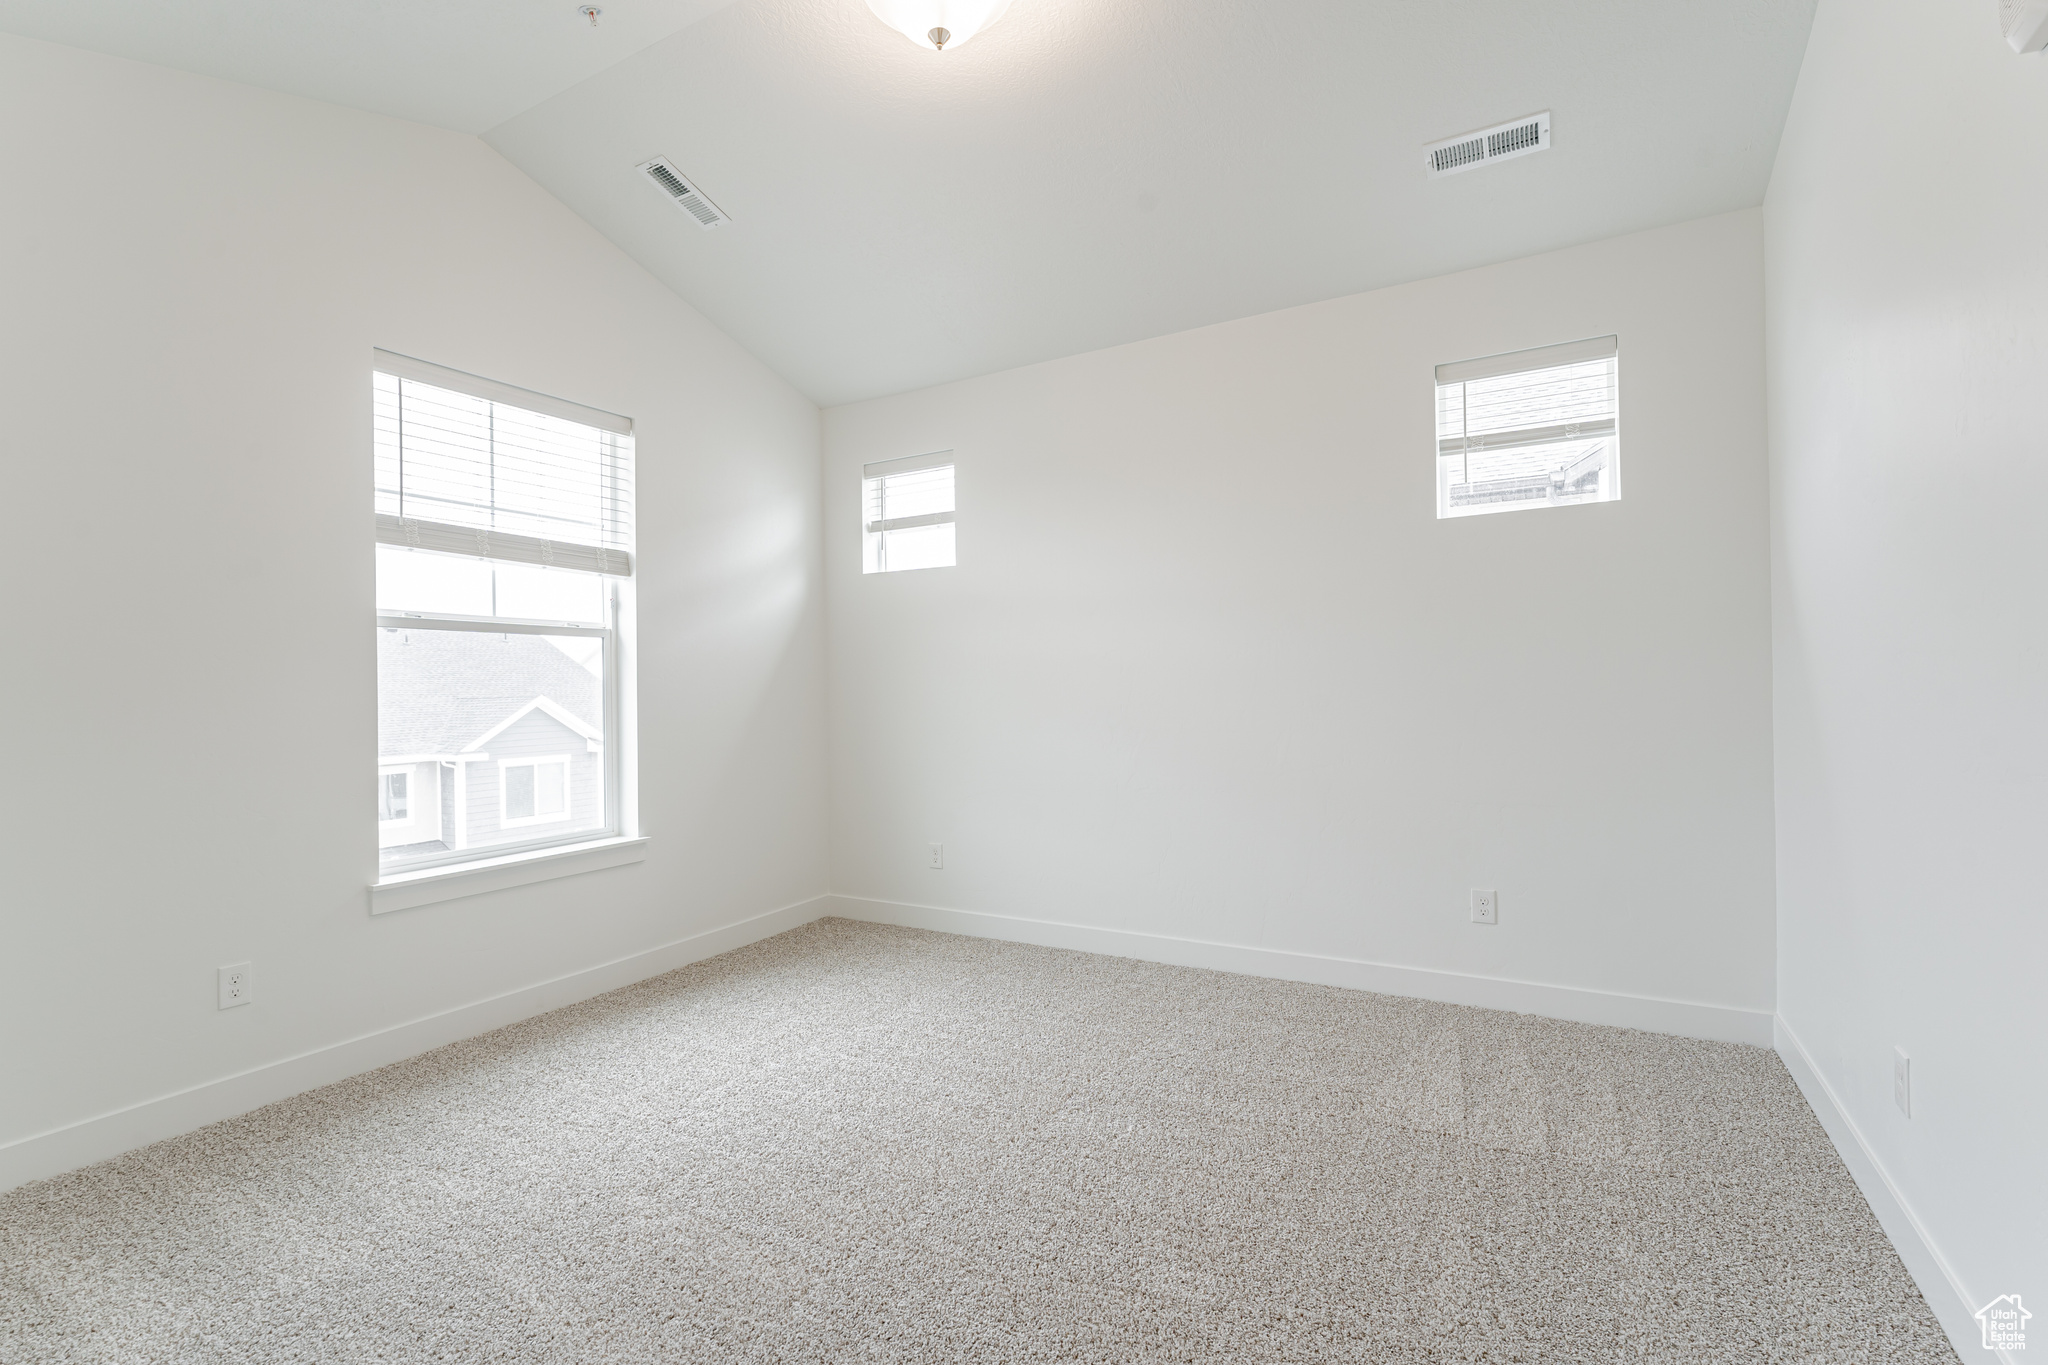 Unfurnished room featuring light colored carpet and vaulted ceiling